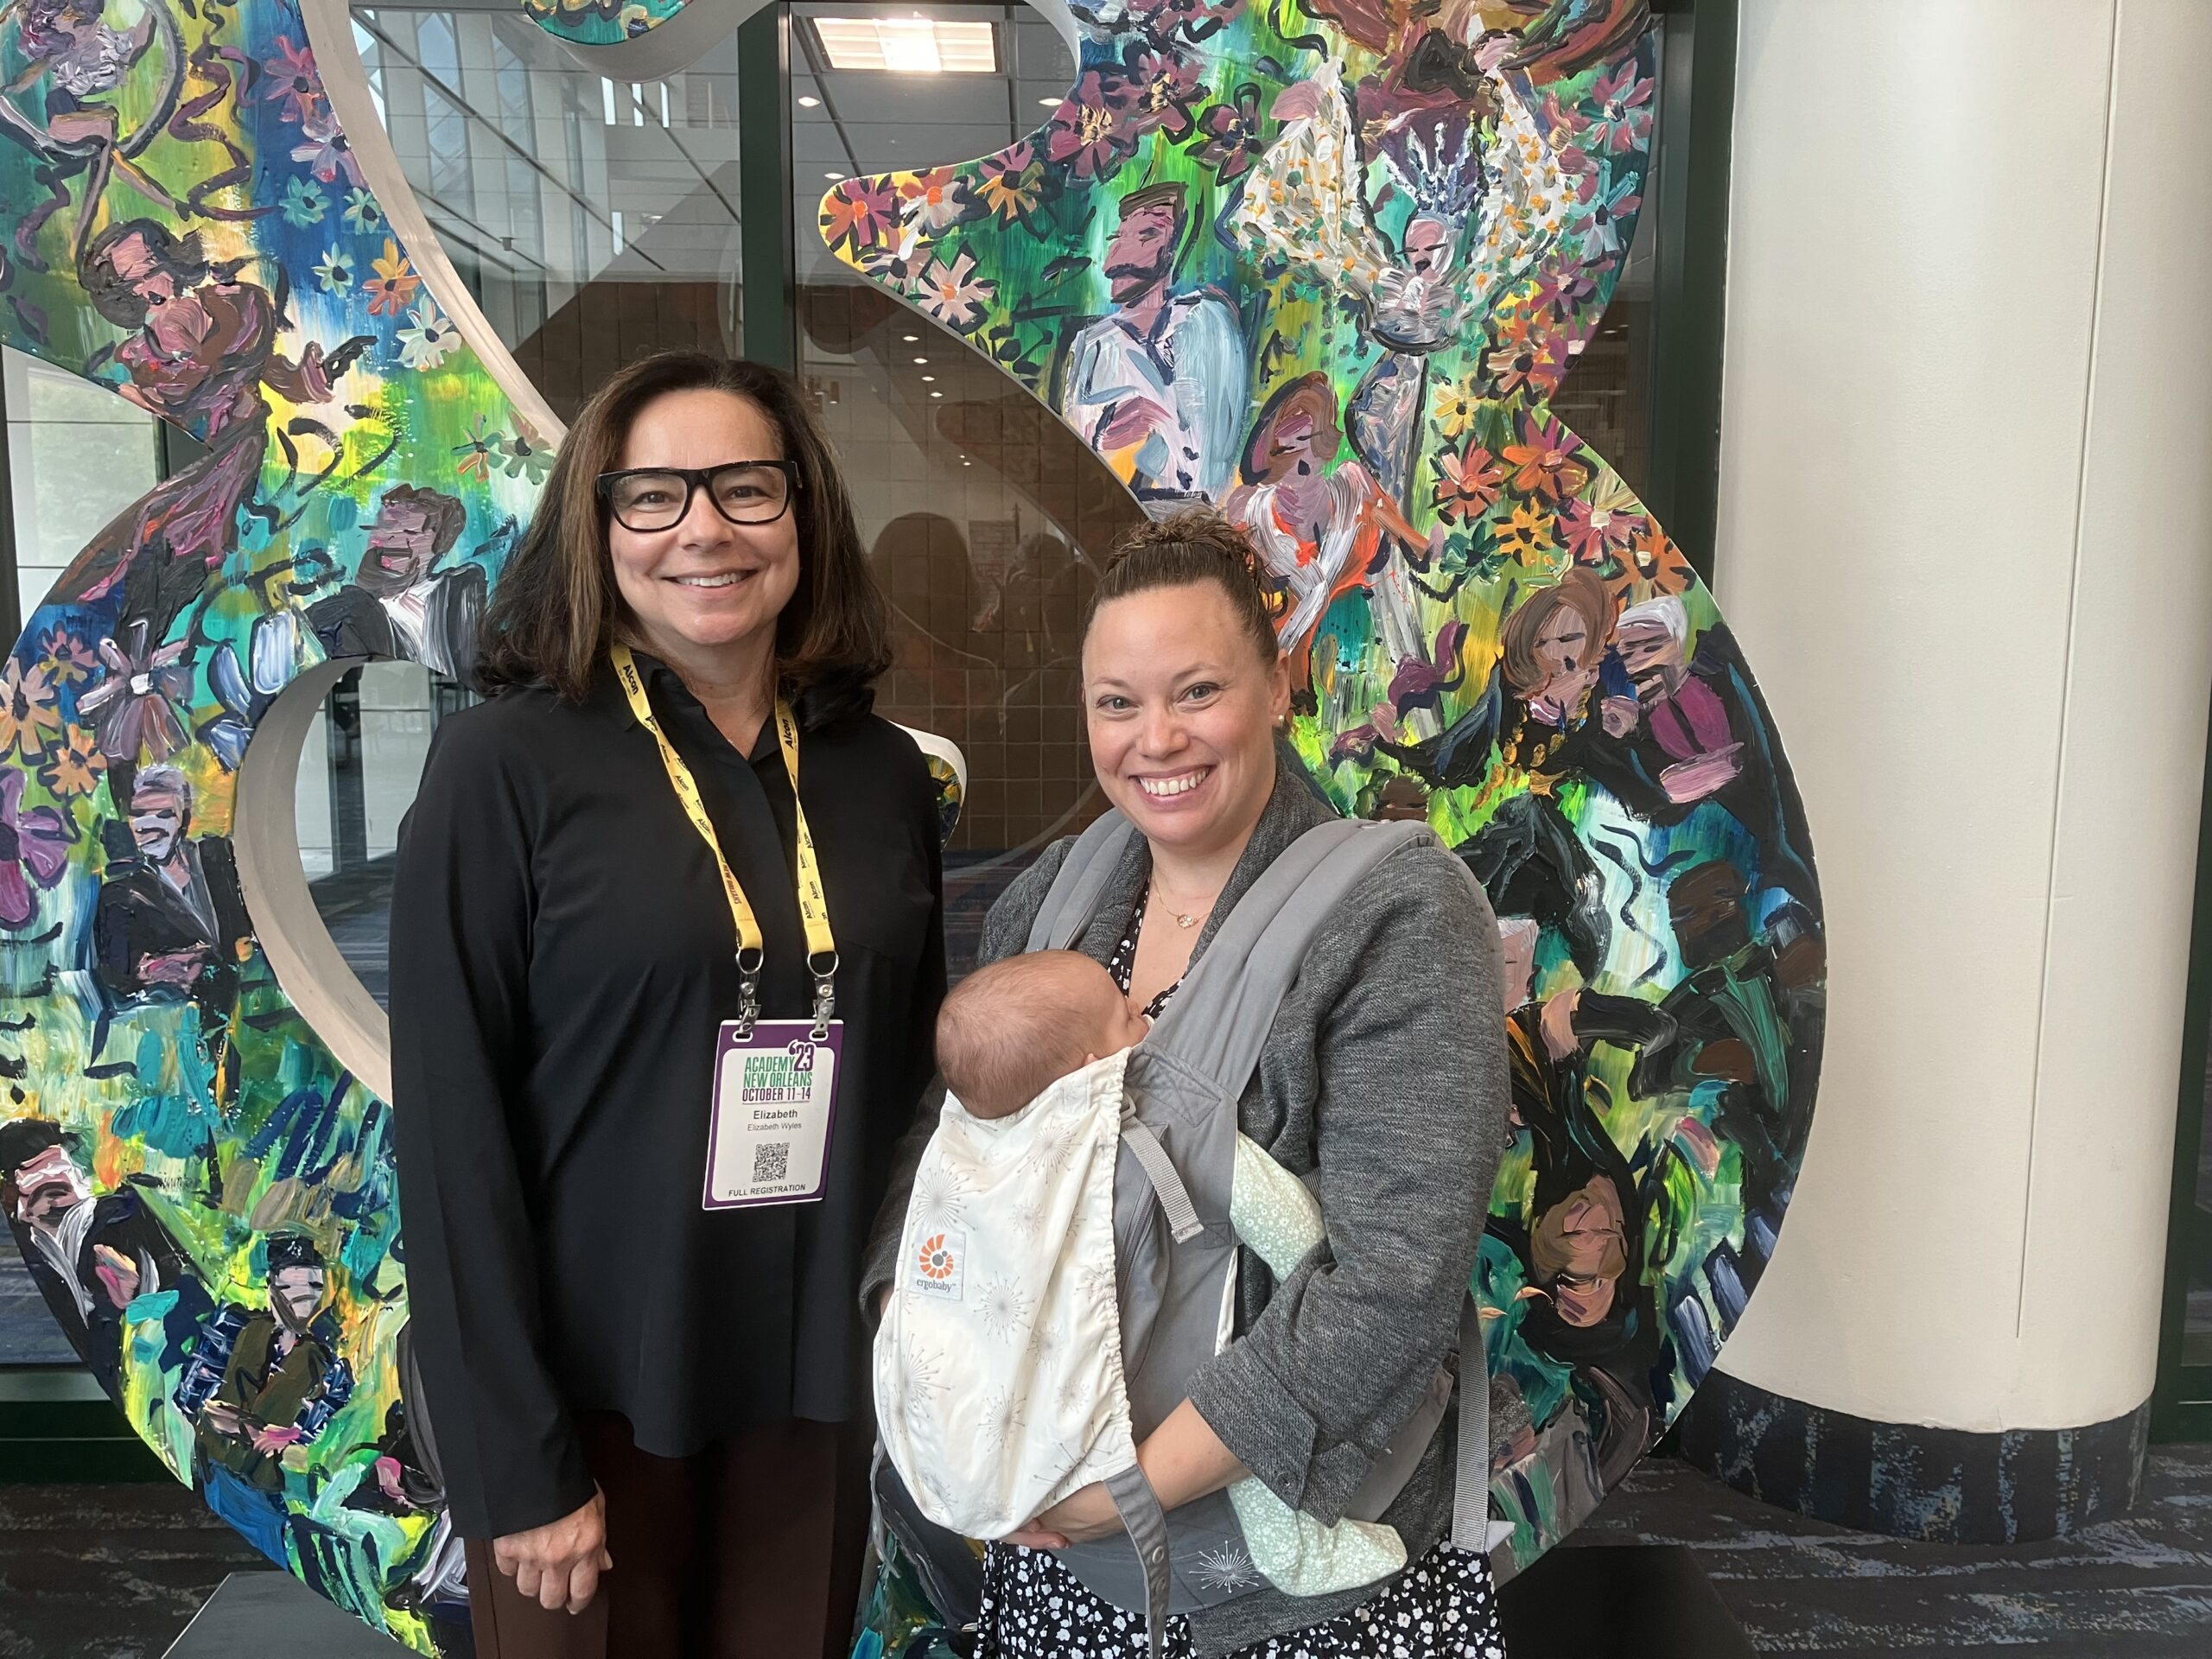 Dr. Wyles and Dr. Sicks, with her baby, take a break in new orleans to talk about leadership development